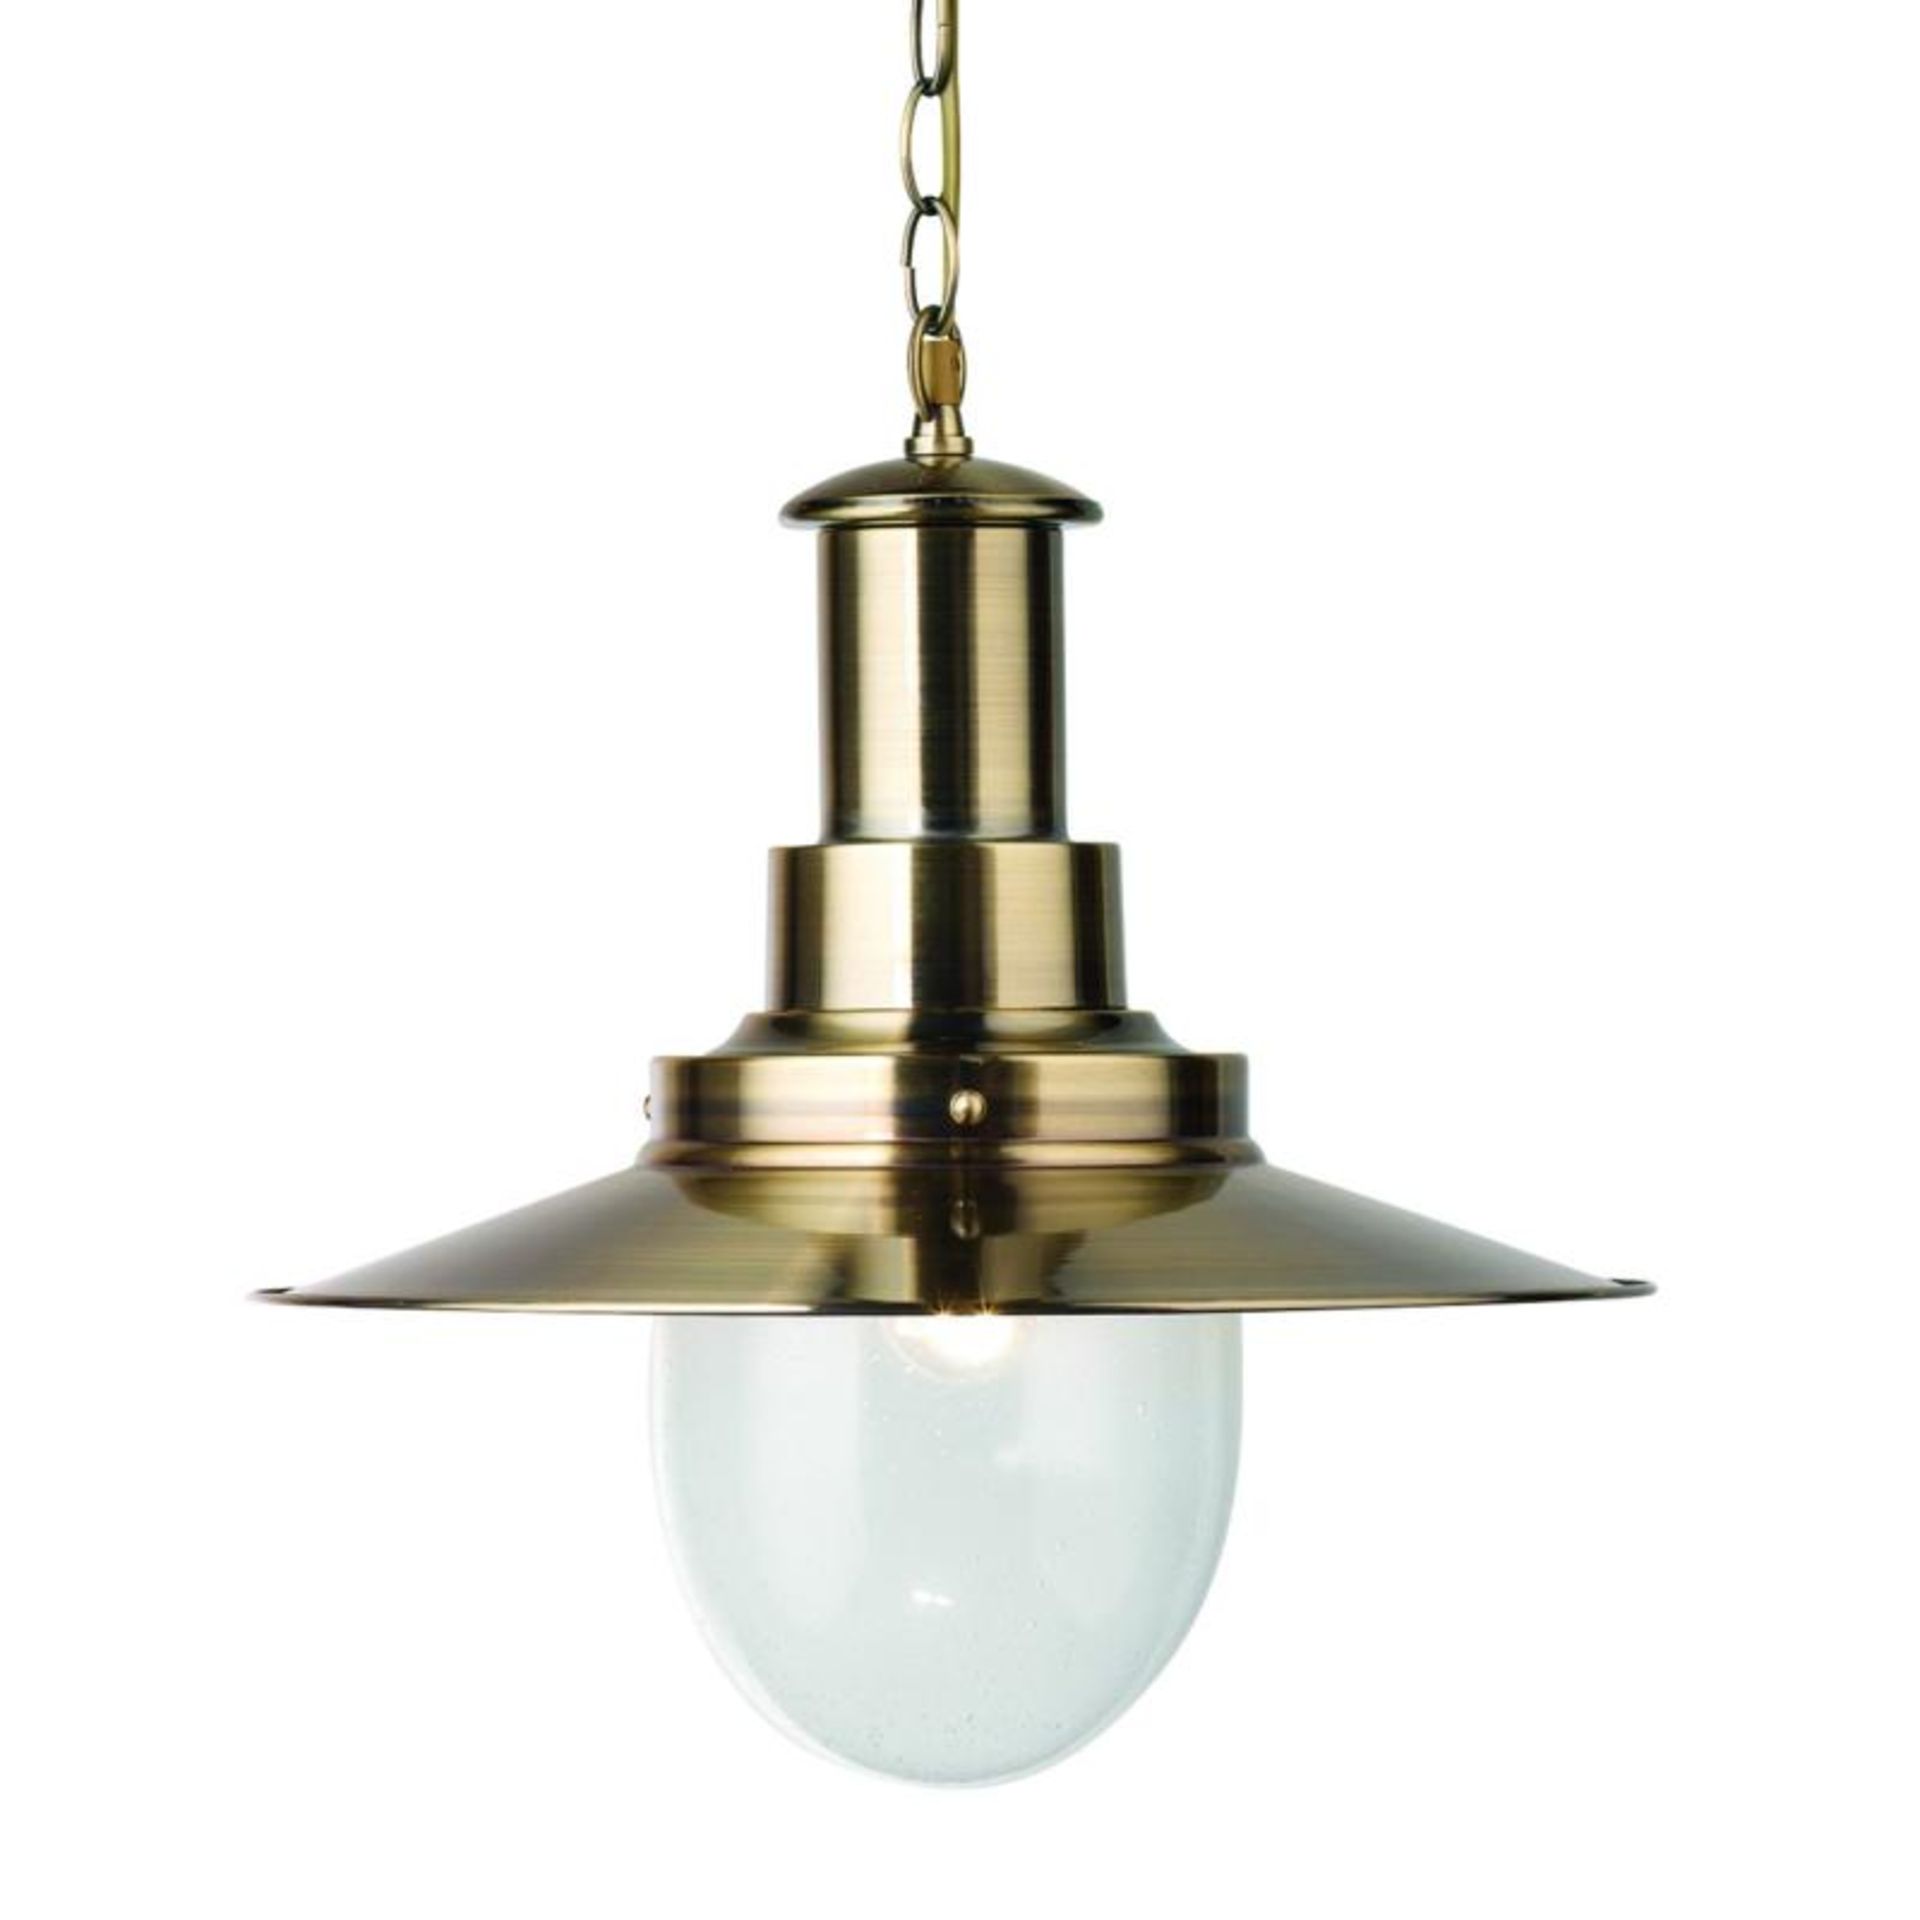 1 x Large Fisherman Antique Brass Pendant Light With Oval Seeded Glass Shade - New Boxed Stock - CL3